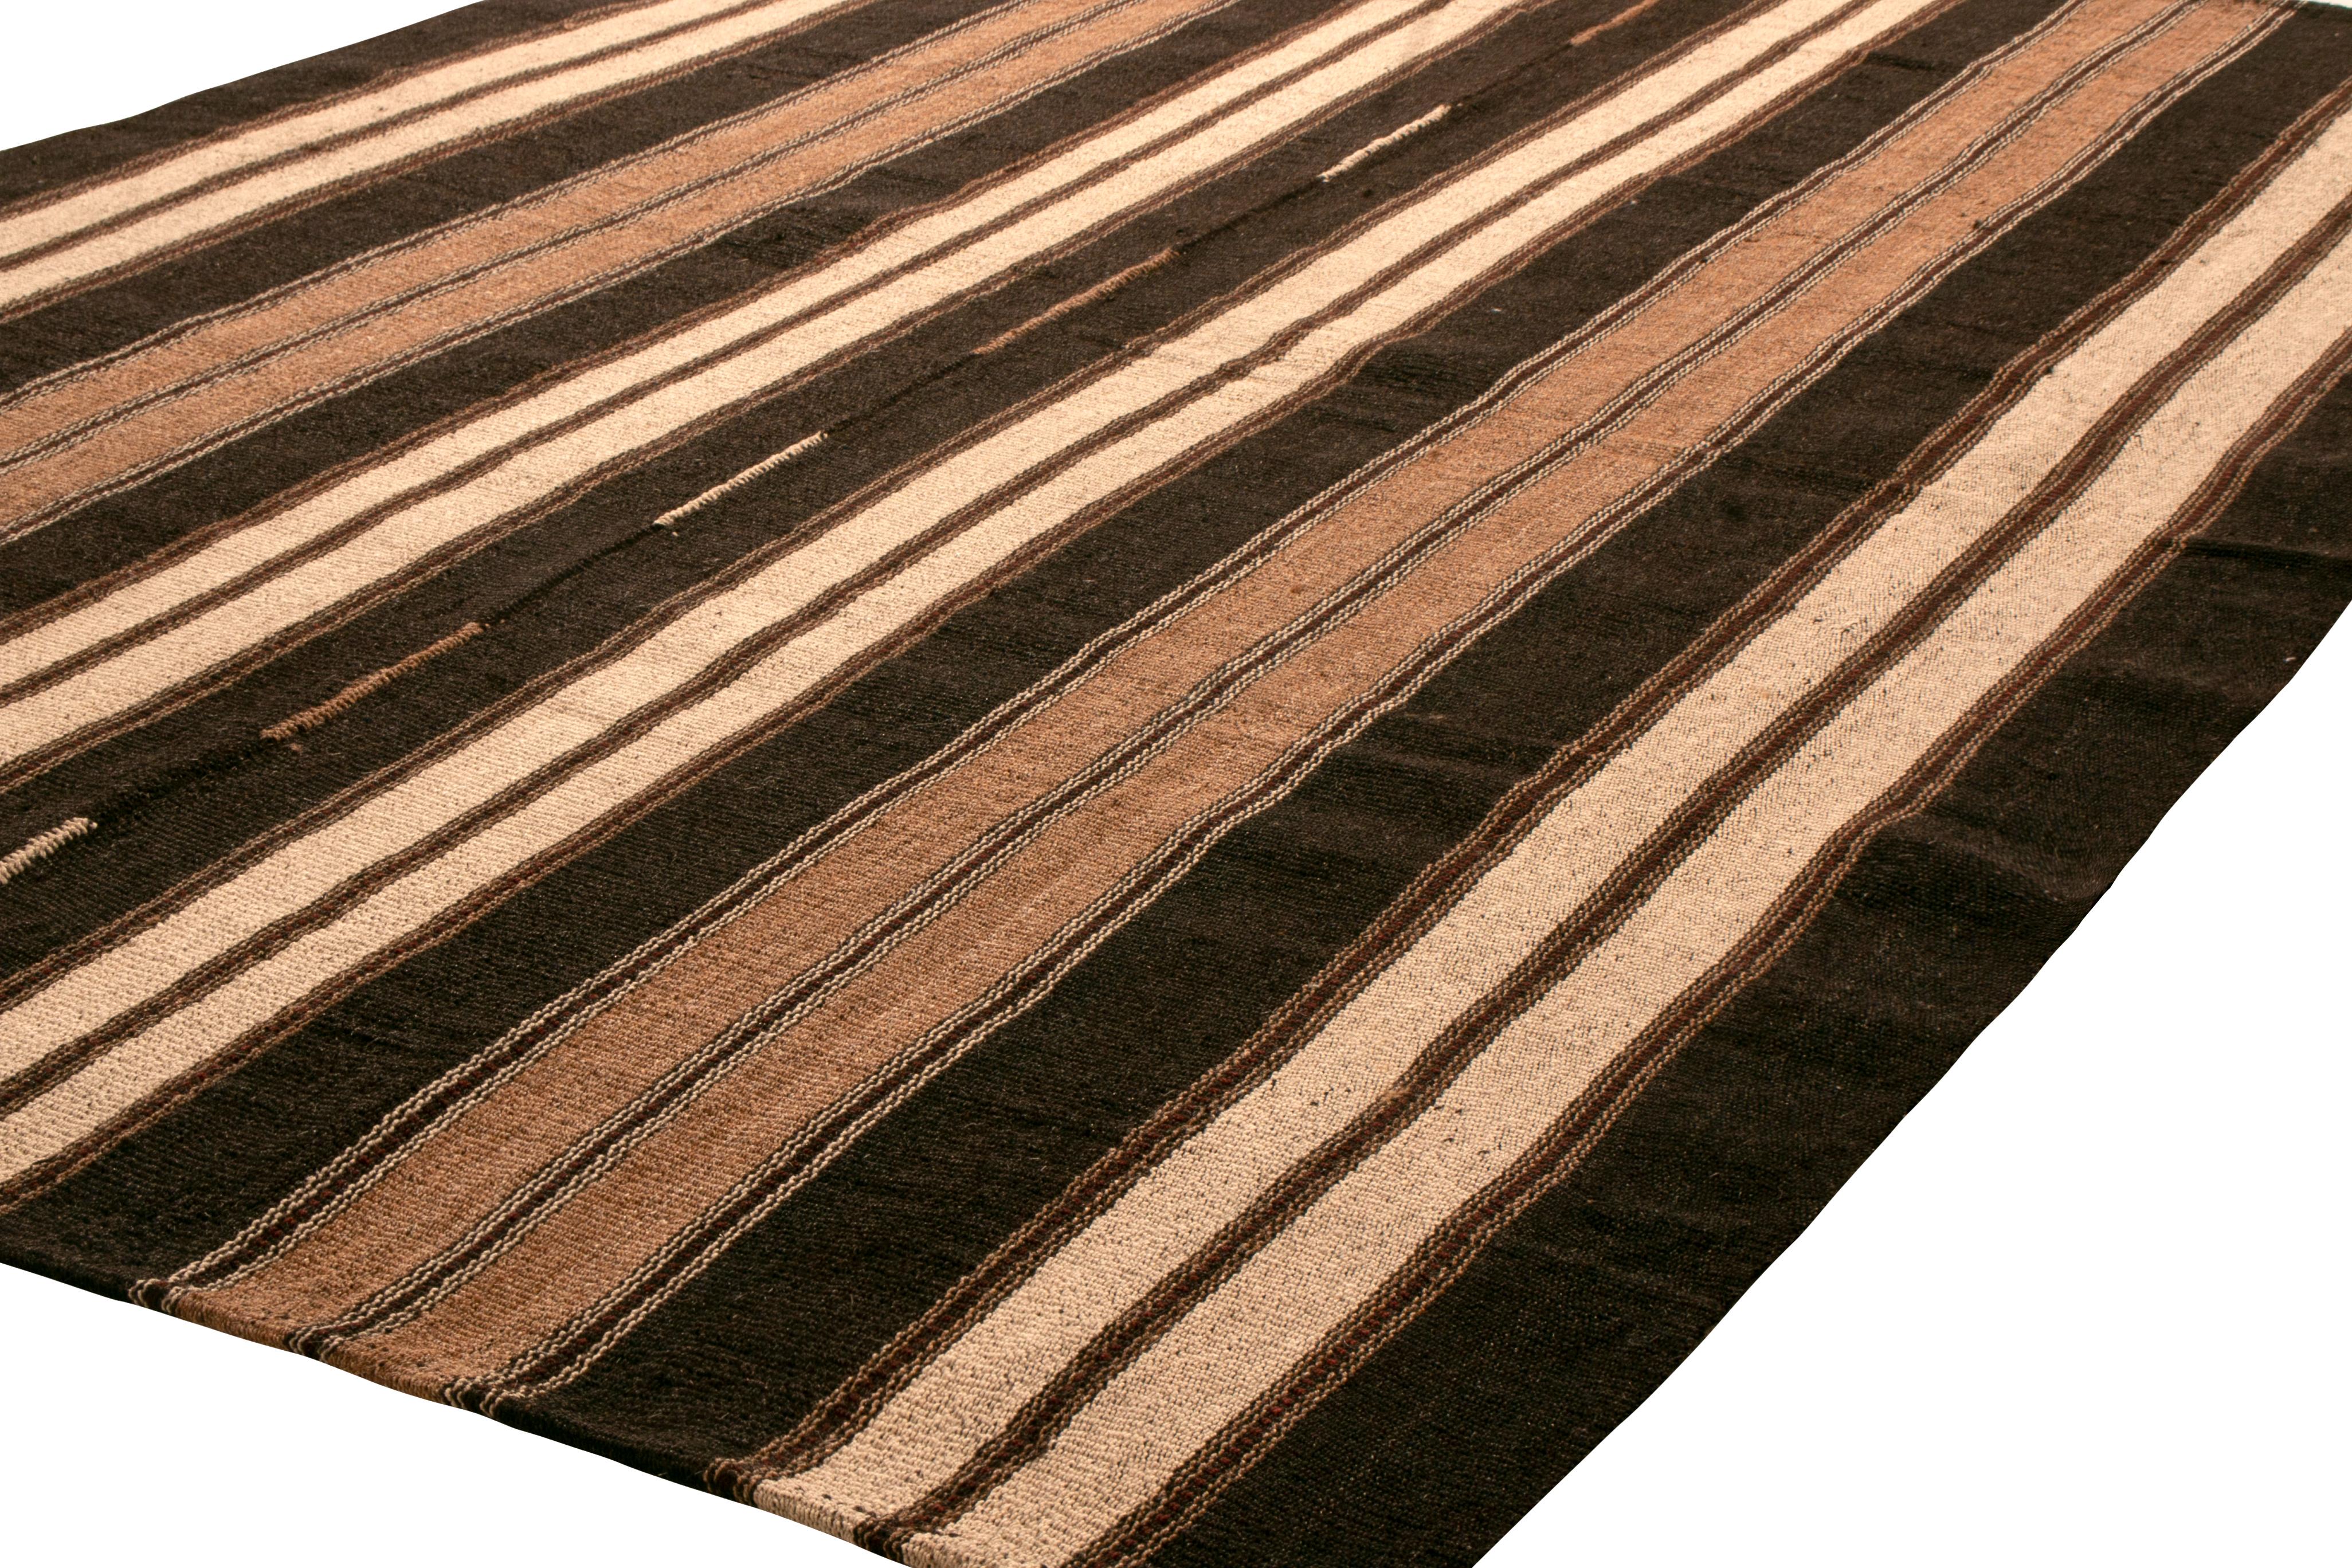 Hand-Woven 1950s Midcentury Persian Kilim Black and Beige-Brown Striped Flat-Weave